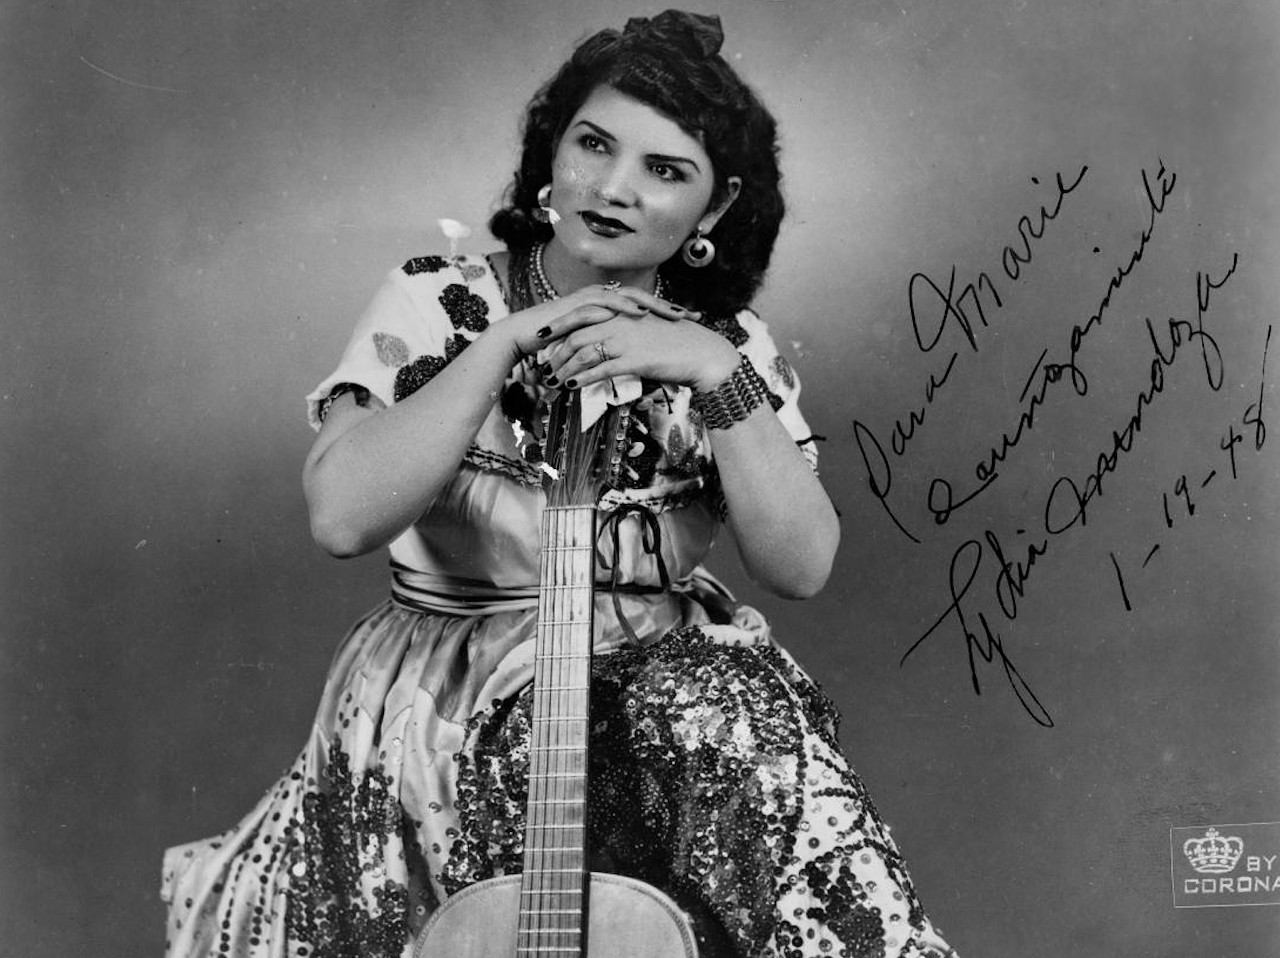 Lydia Mendoza
Considered the “Mother of Tejano music,” it makes sense that Lydia Mendoza would have San Antonio ties. She was born in Houston, however, and spent much of her youth with her family hitchhiking around Texas to play for migrant workers. Eventually, at age 12, she caught the attention of an Alamo City radio personality and spent considerable time here.